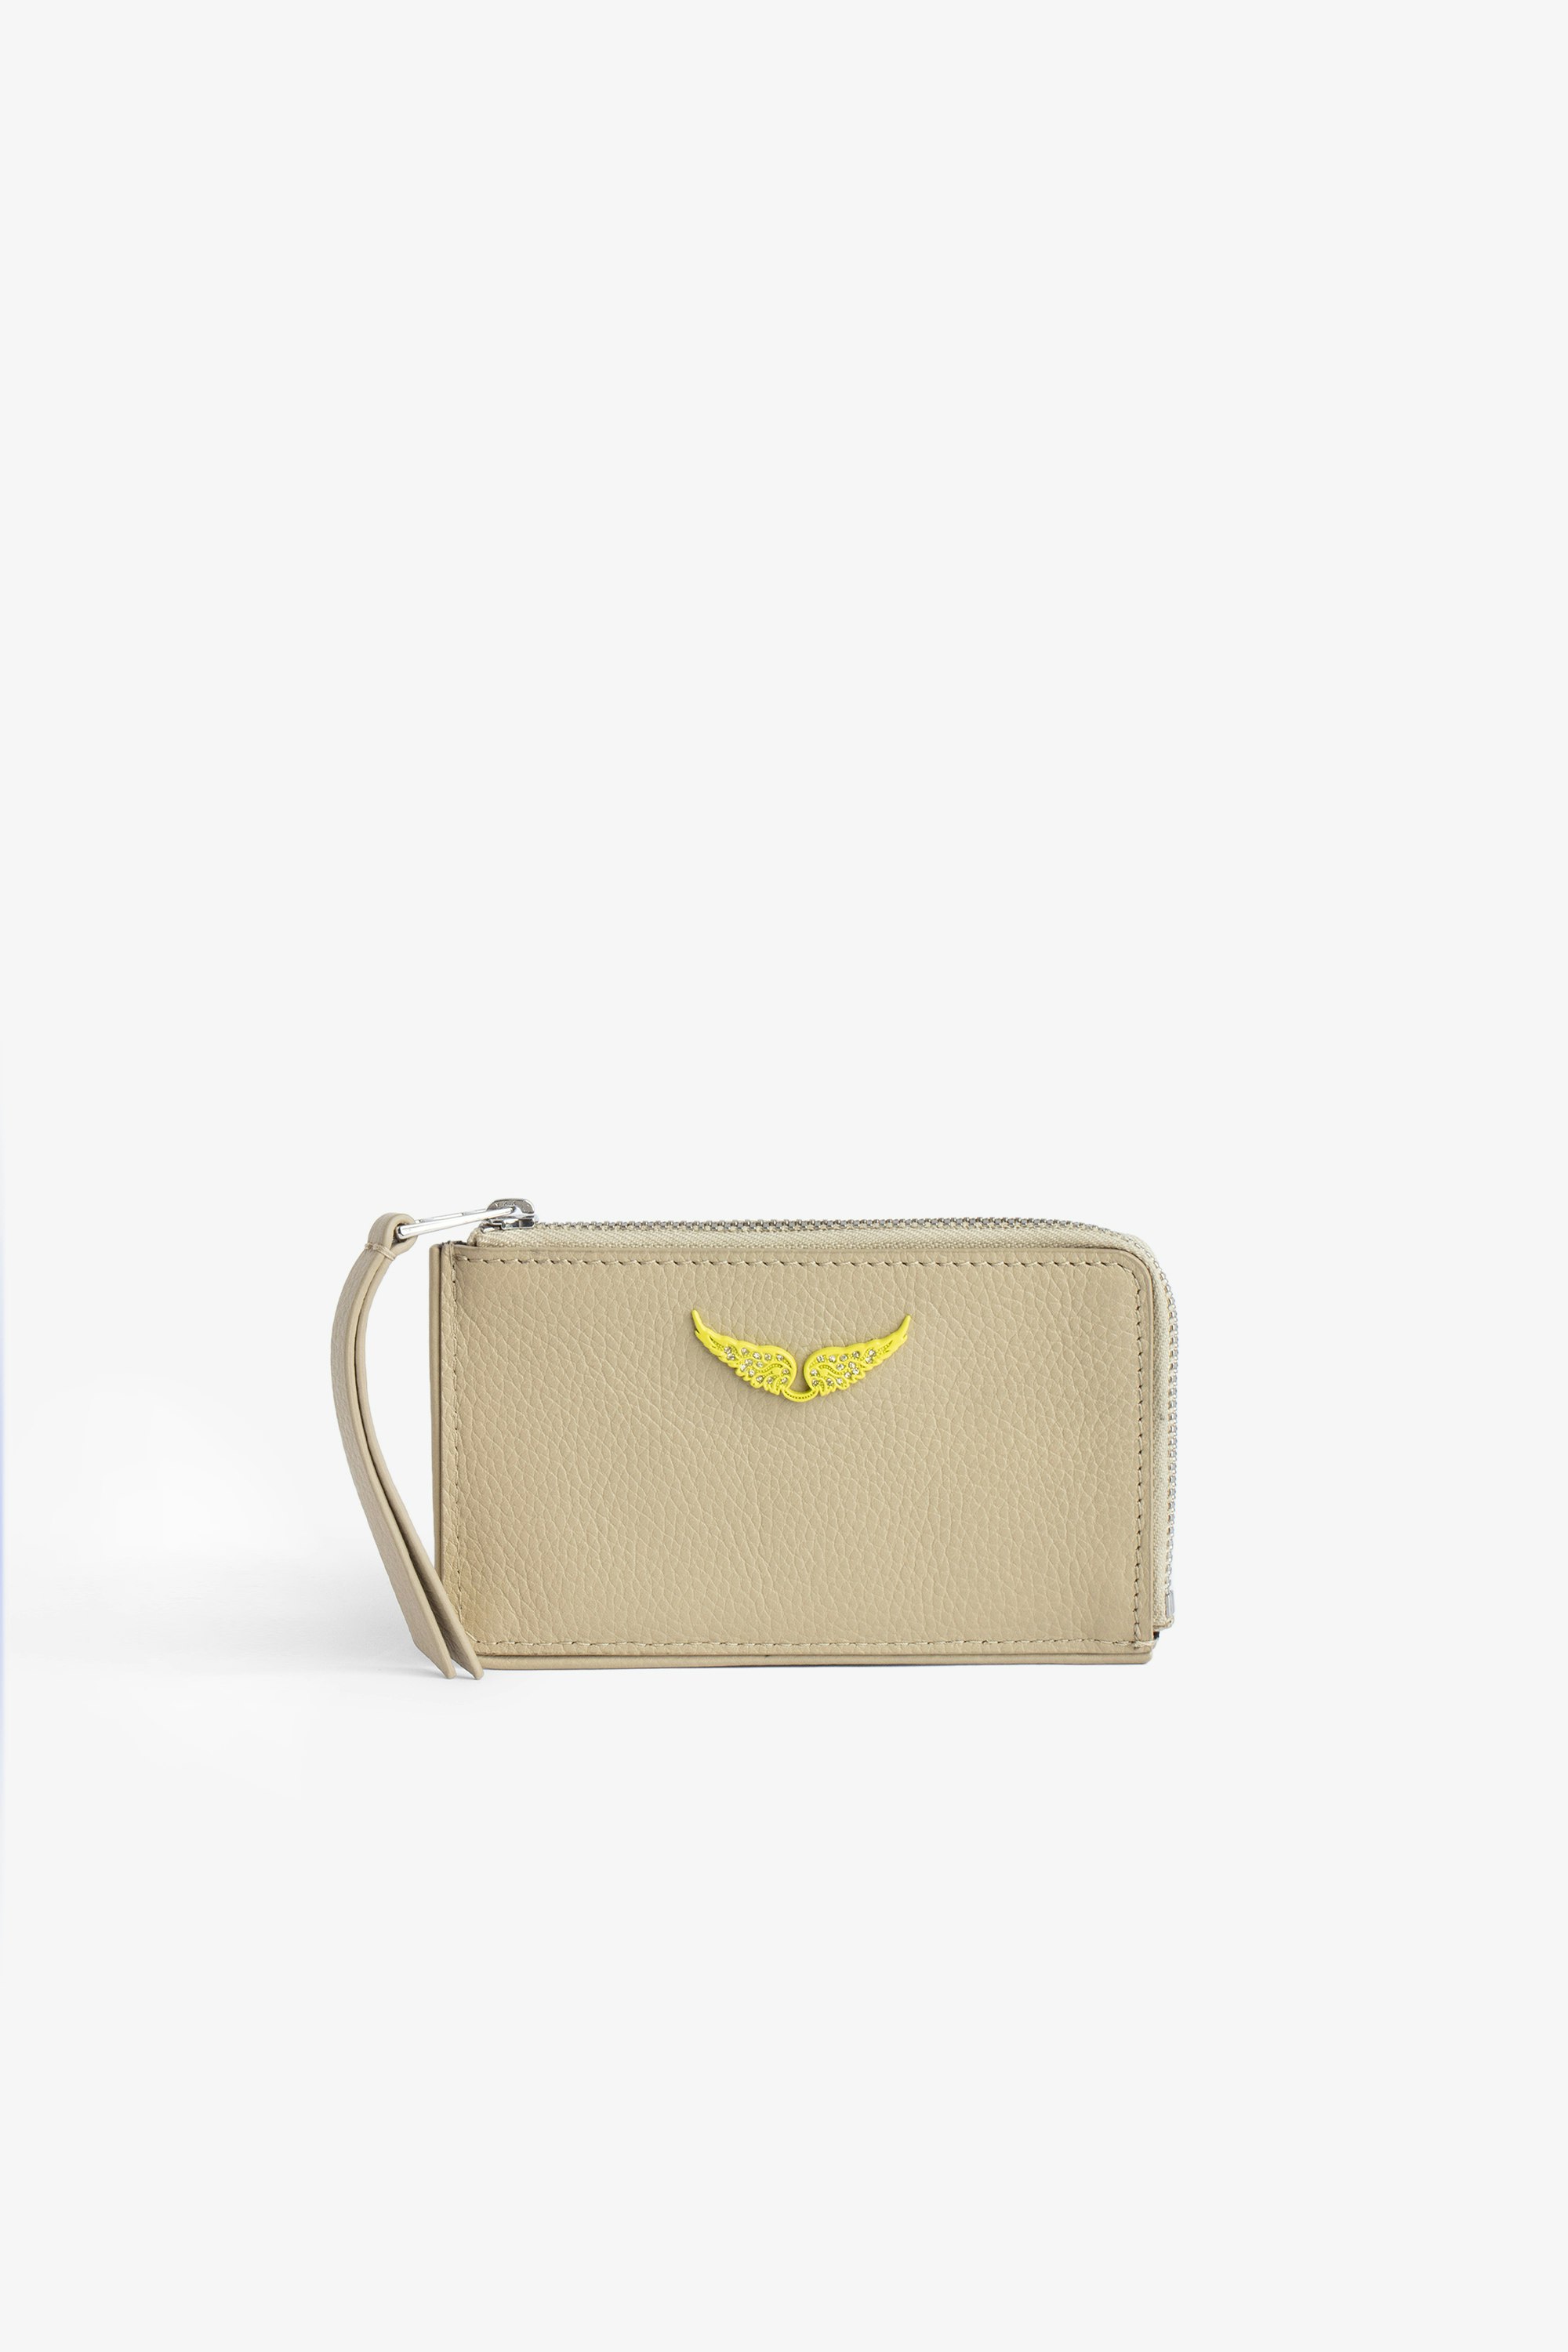 ZV Card Case Women’s zipped card holder with slots in beige smooth leather with yellow wings